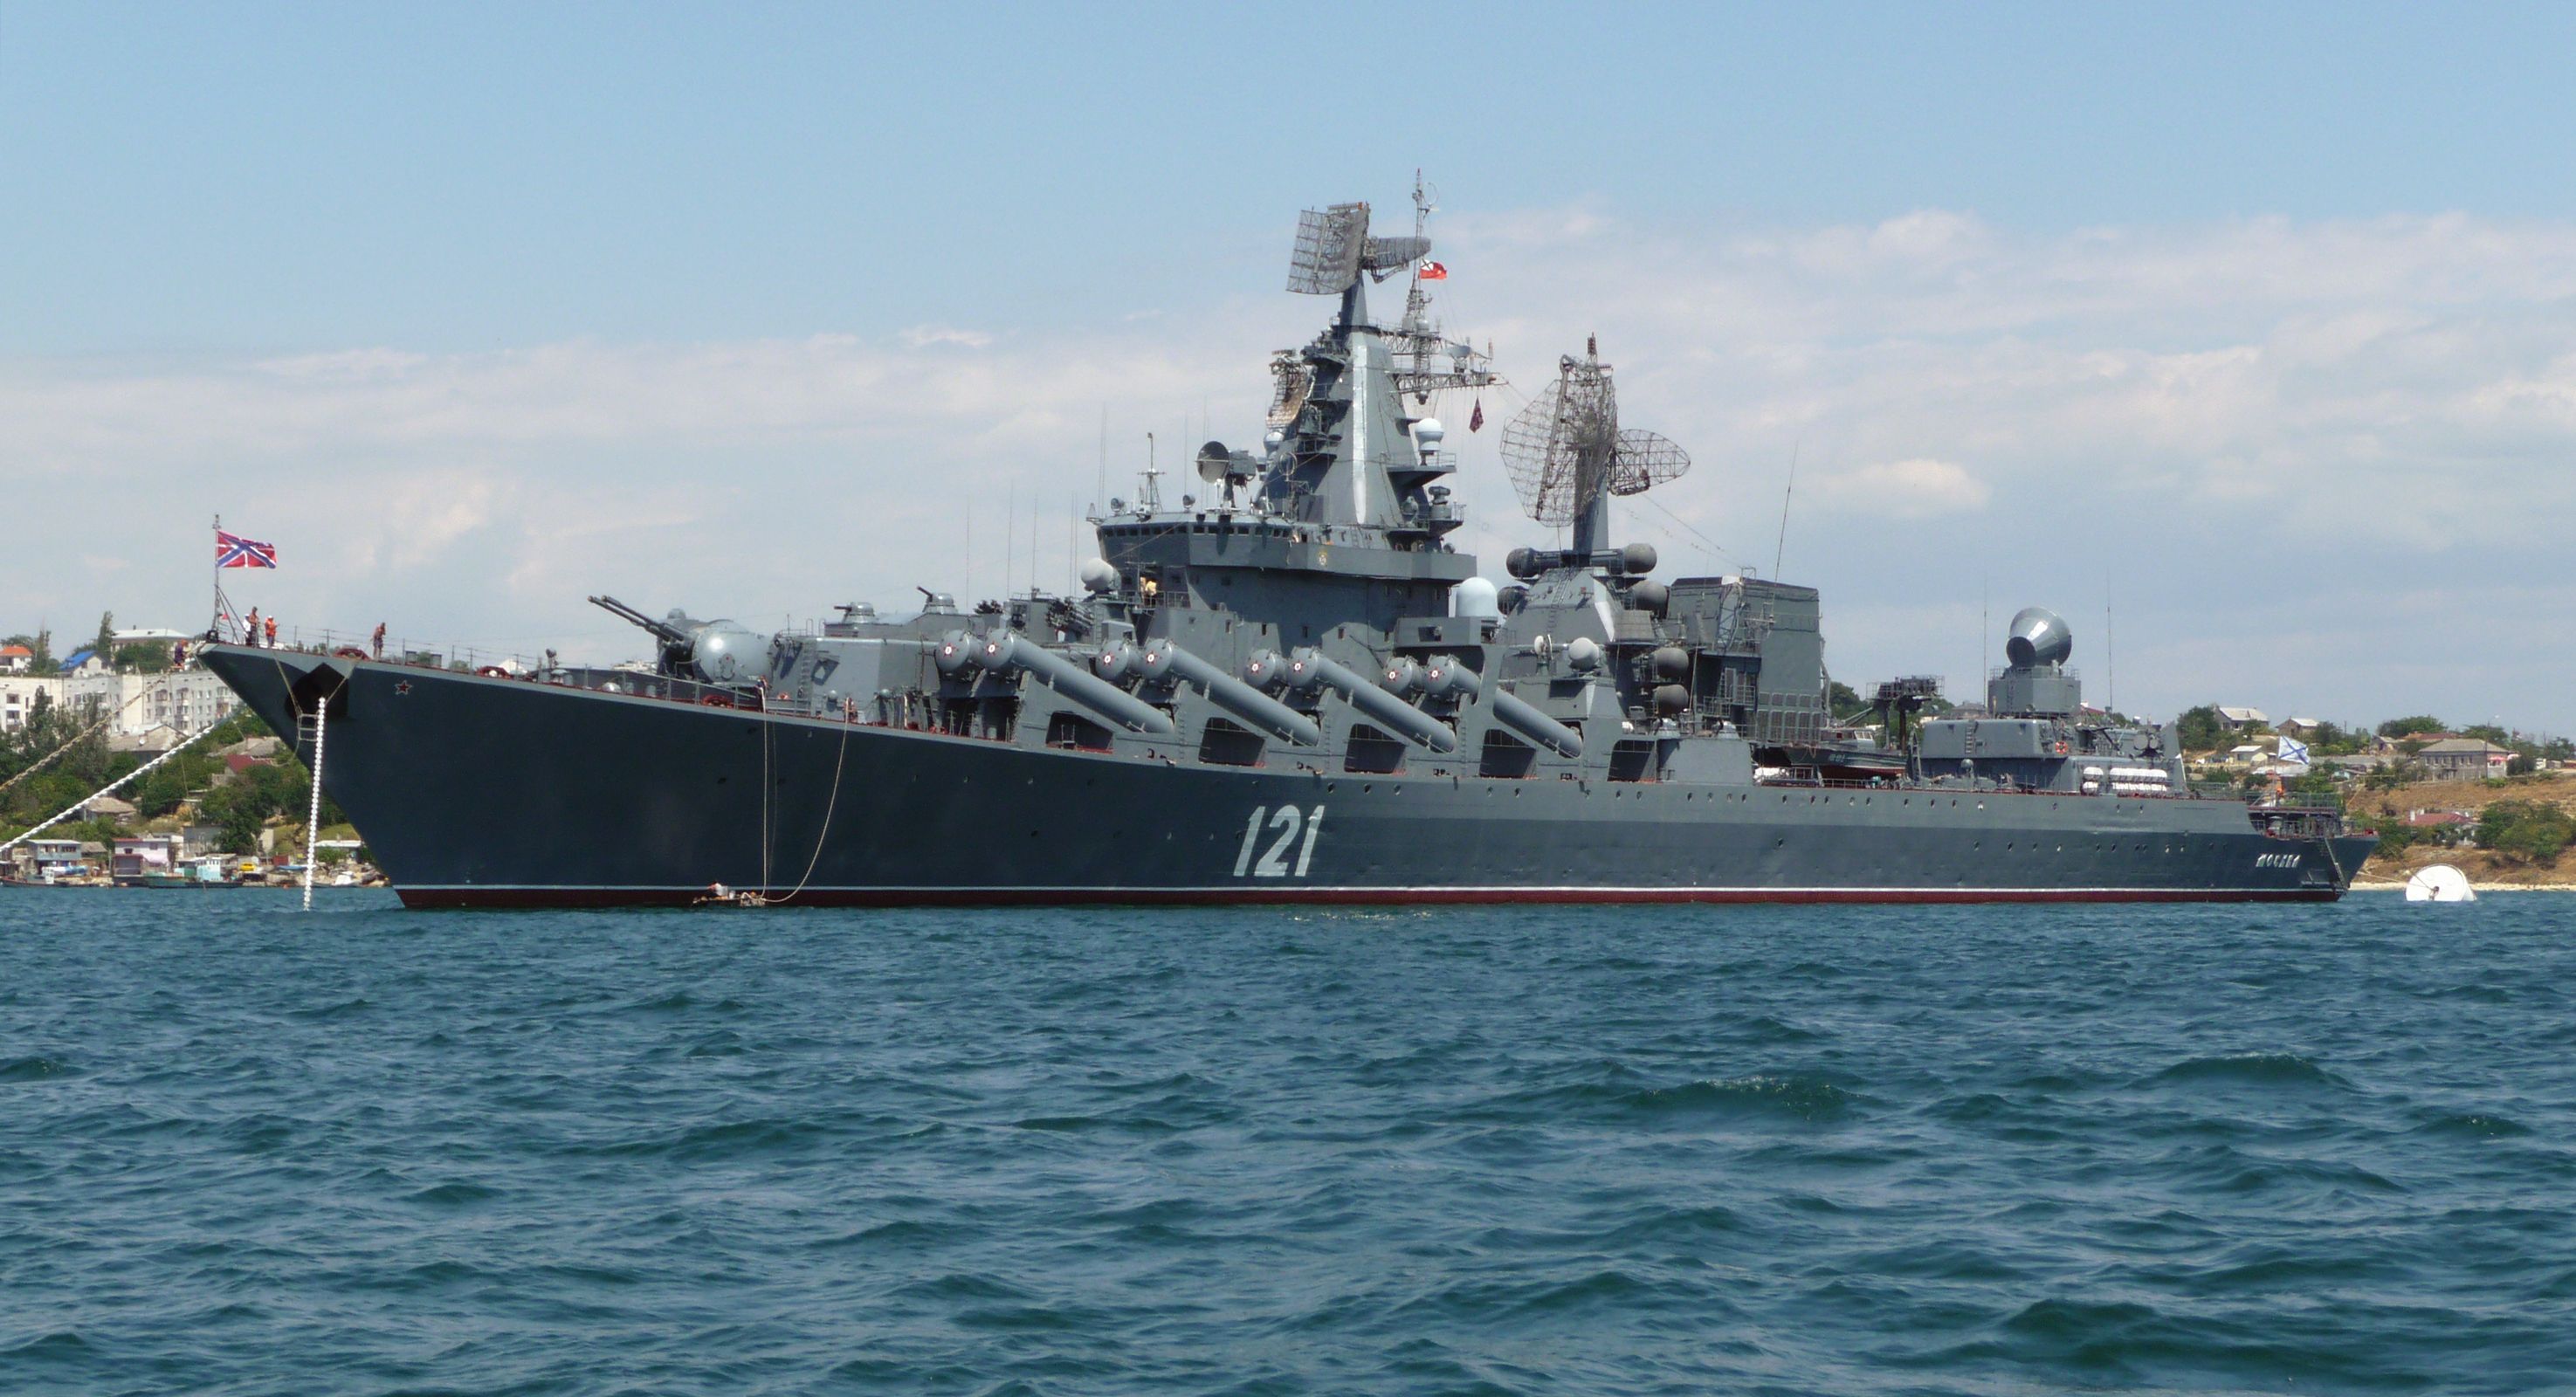 Russian Flagship Moskva in fire, Ukraine claims Neptune Missile hit it